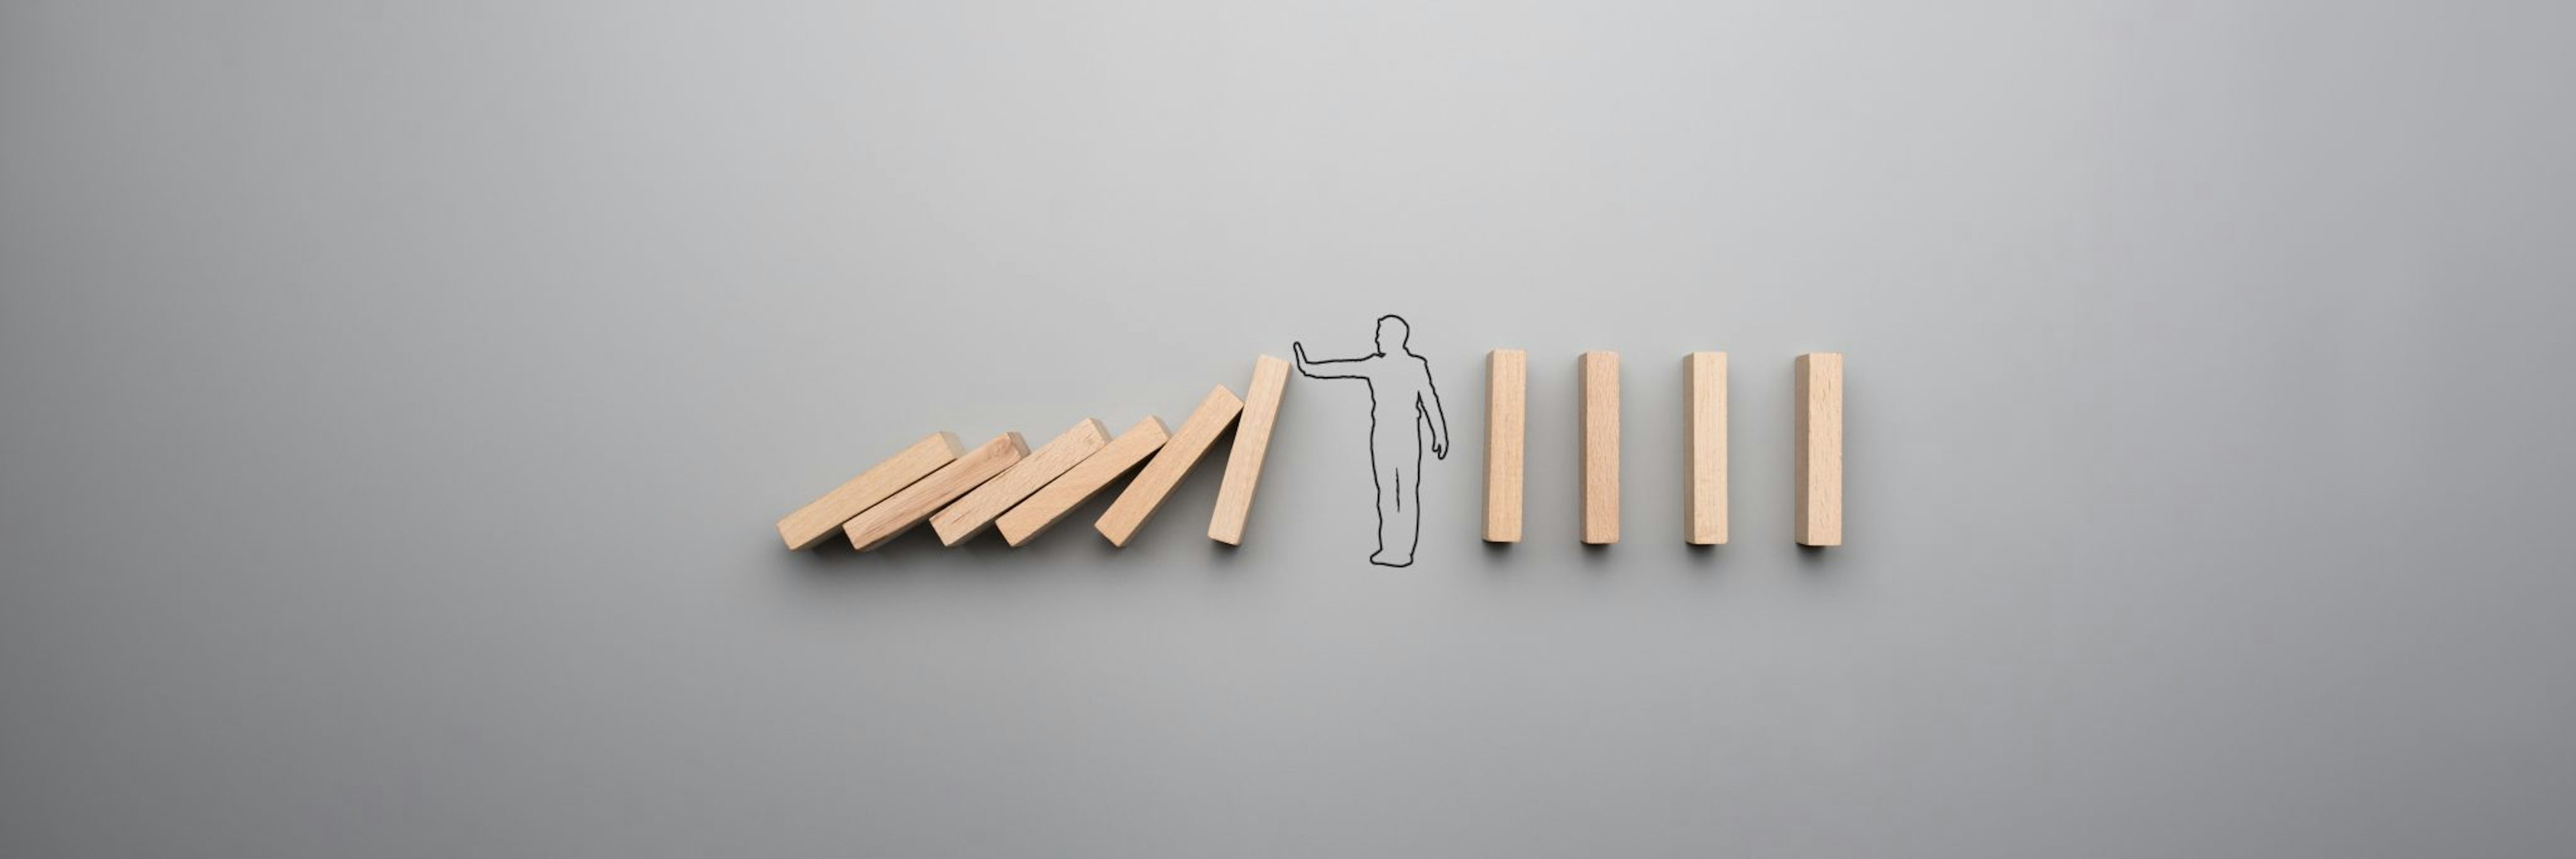 Businessman stopping the domino effect on gray background.